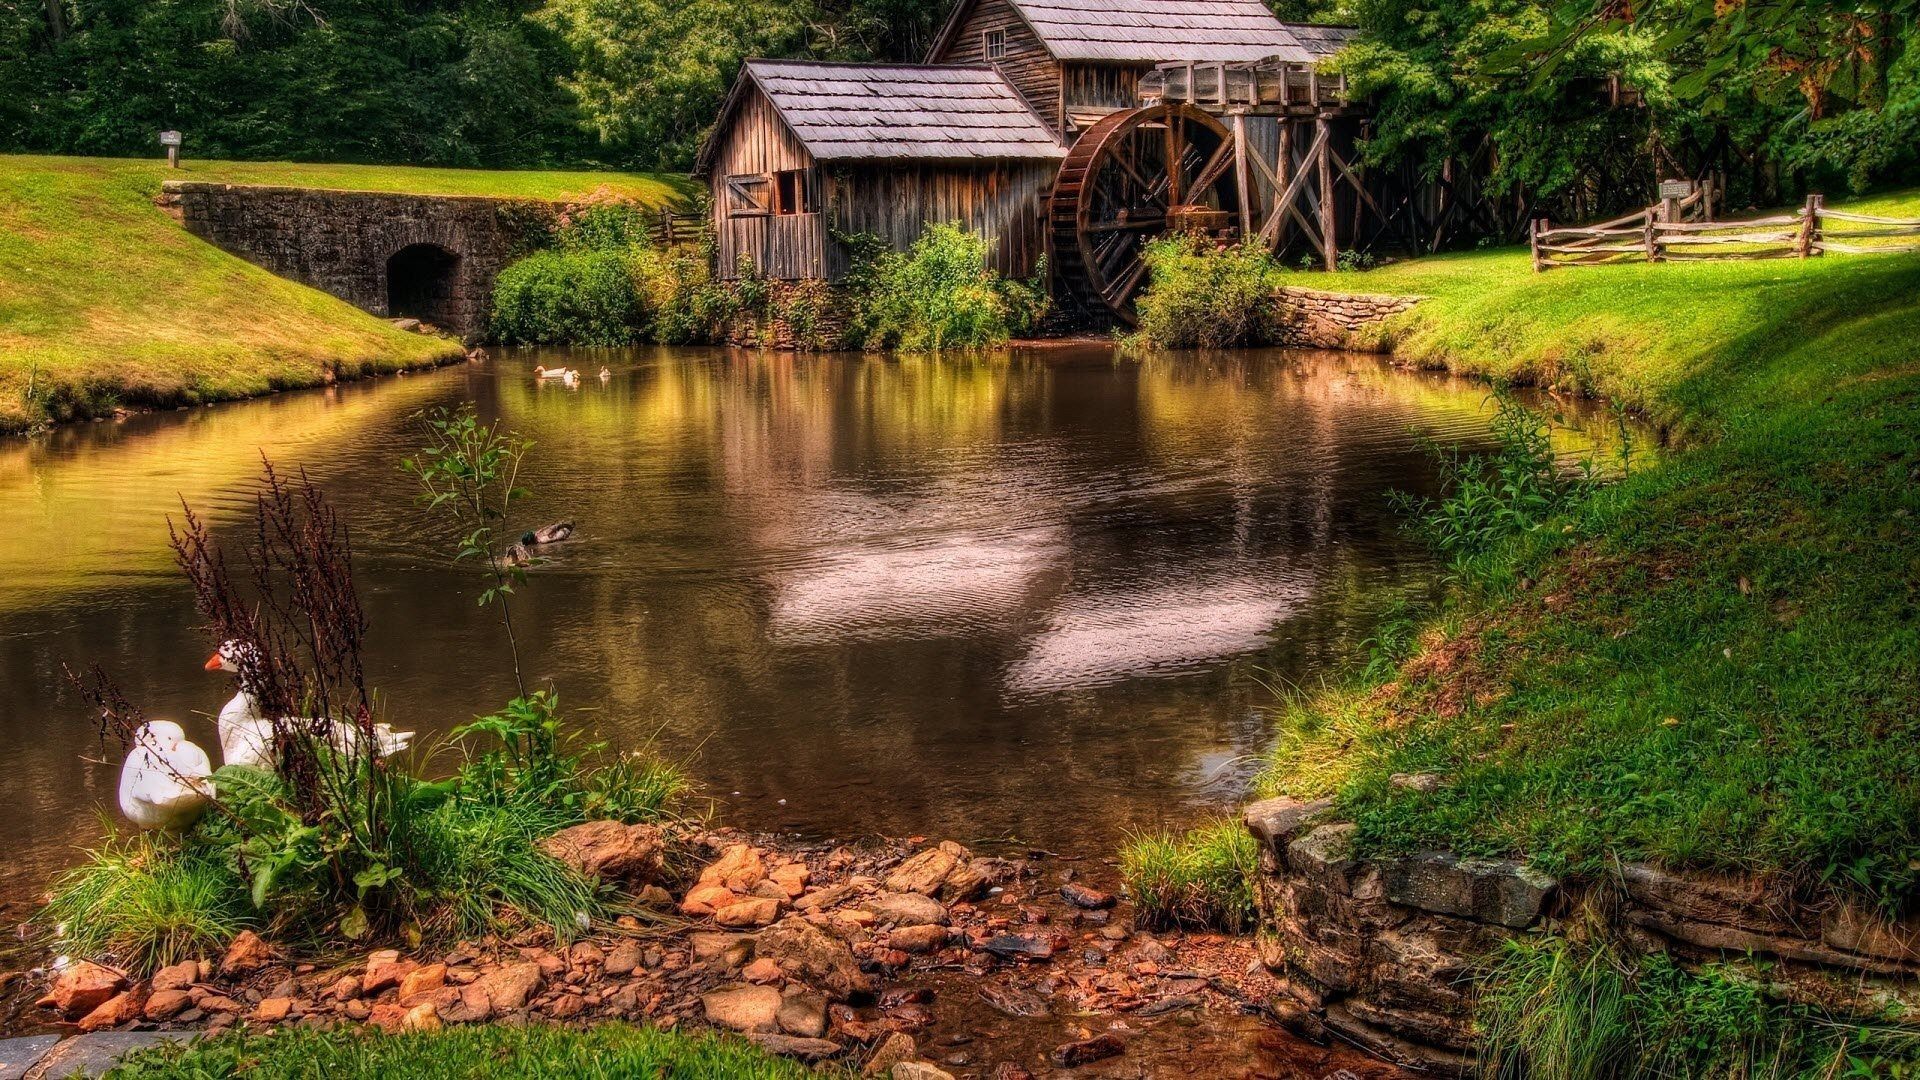 Most, Beautiful, Cottage, High, Resolution, Wallpaper, For, Desktop, Background, Download, Cottage, Image, Free, Amazing Photo, Cool Image